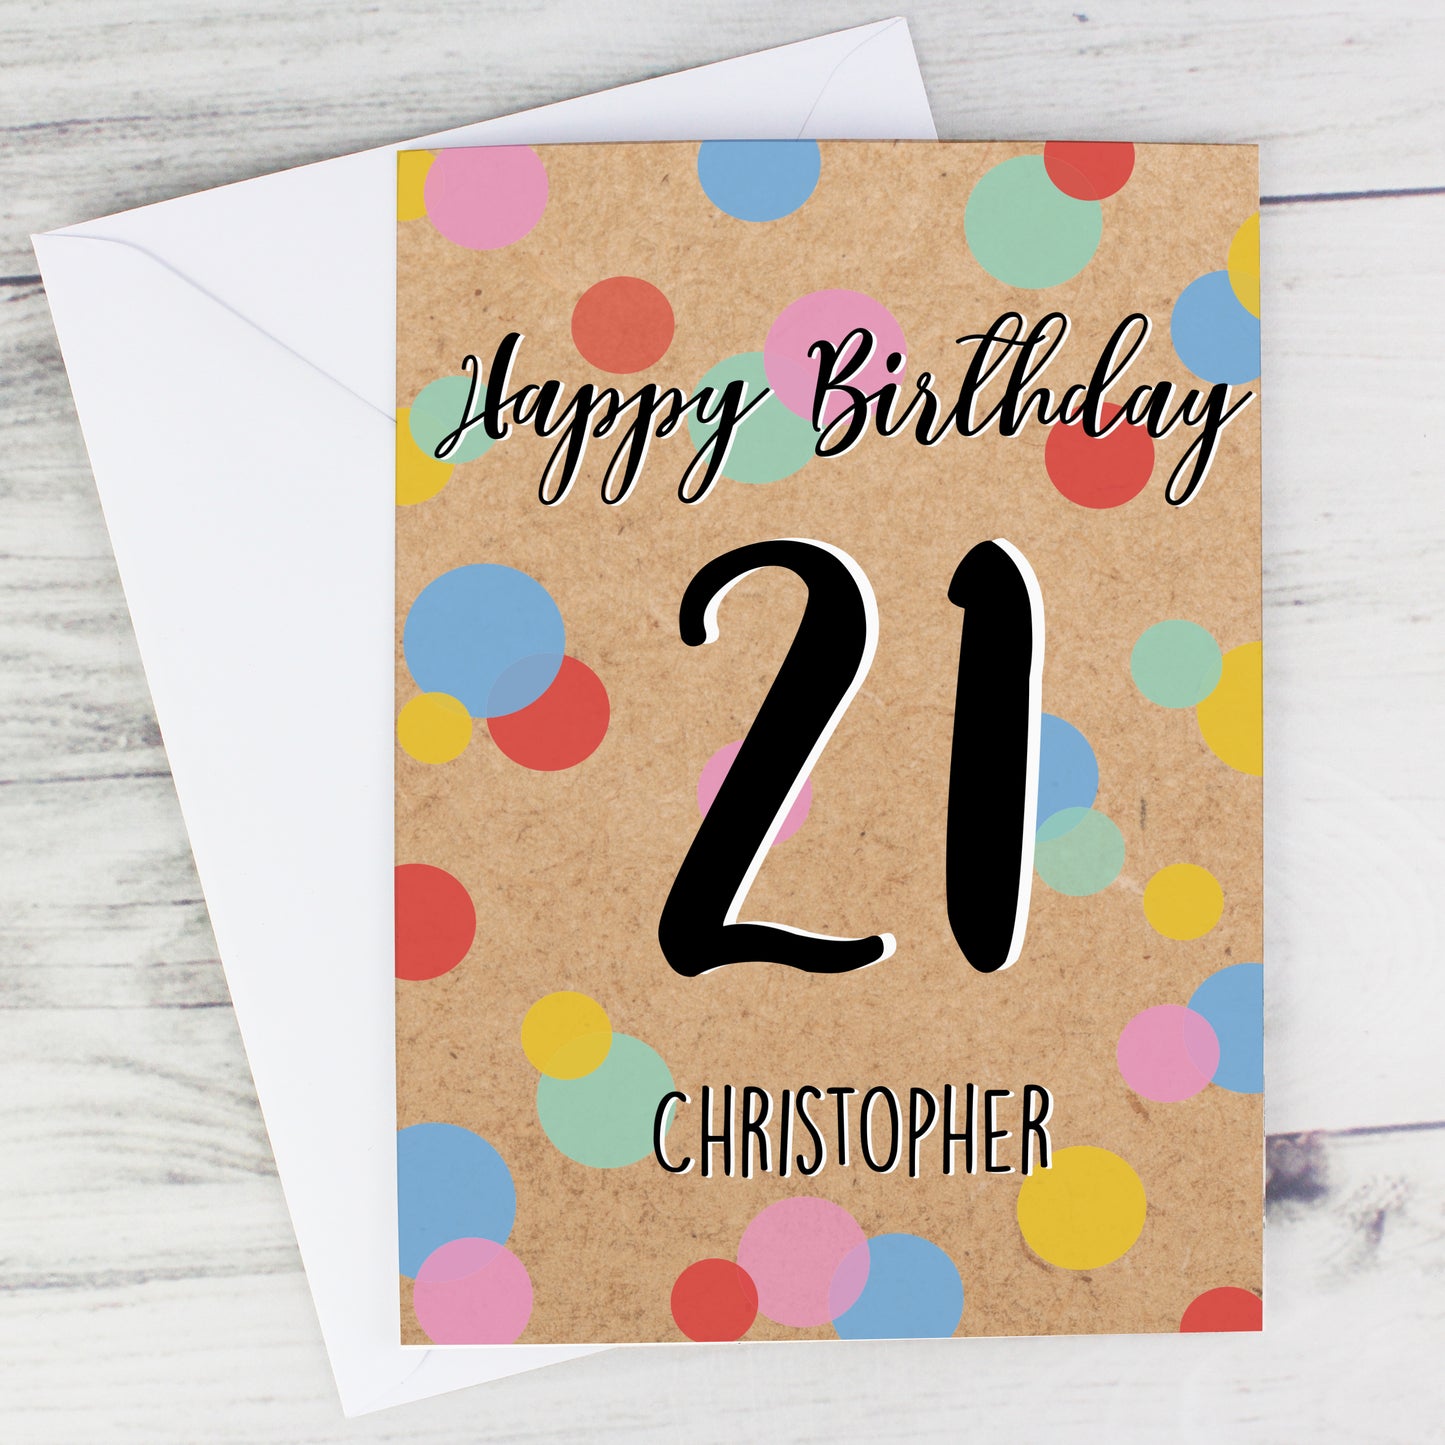 Personalised Rainbow Spot Birthday Card - FREE STANDARD UK DELIVERY! - Violet Belle Gifts - 